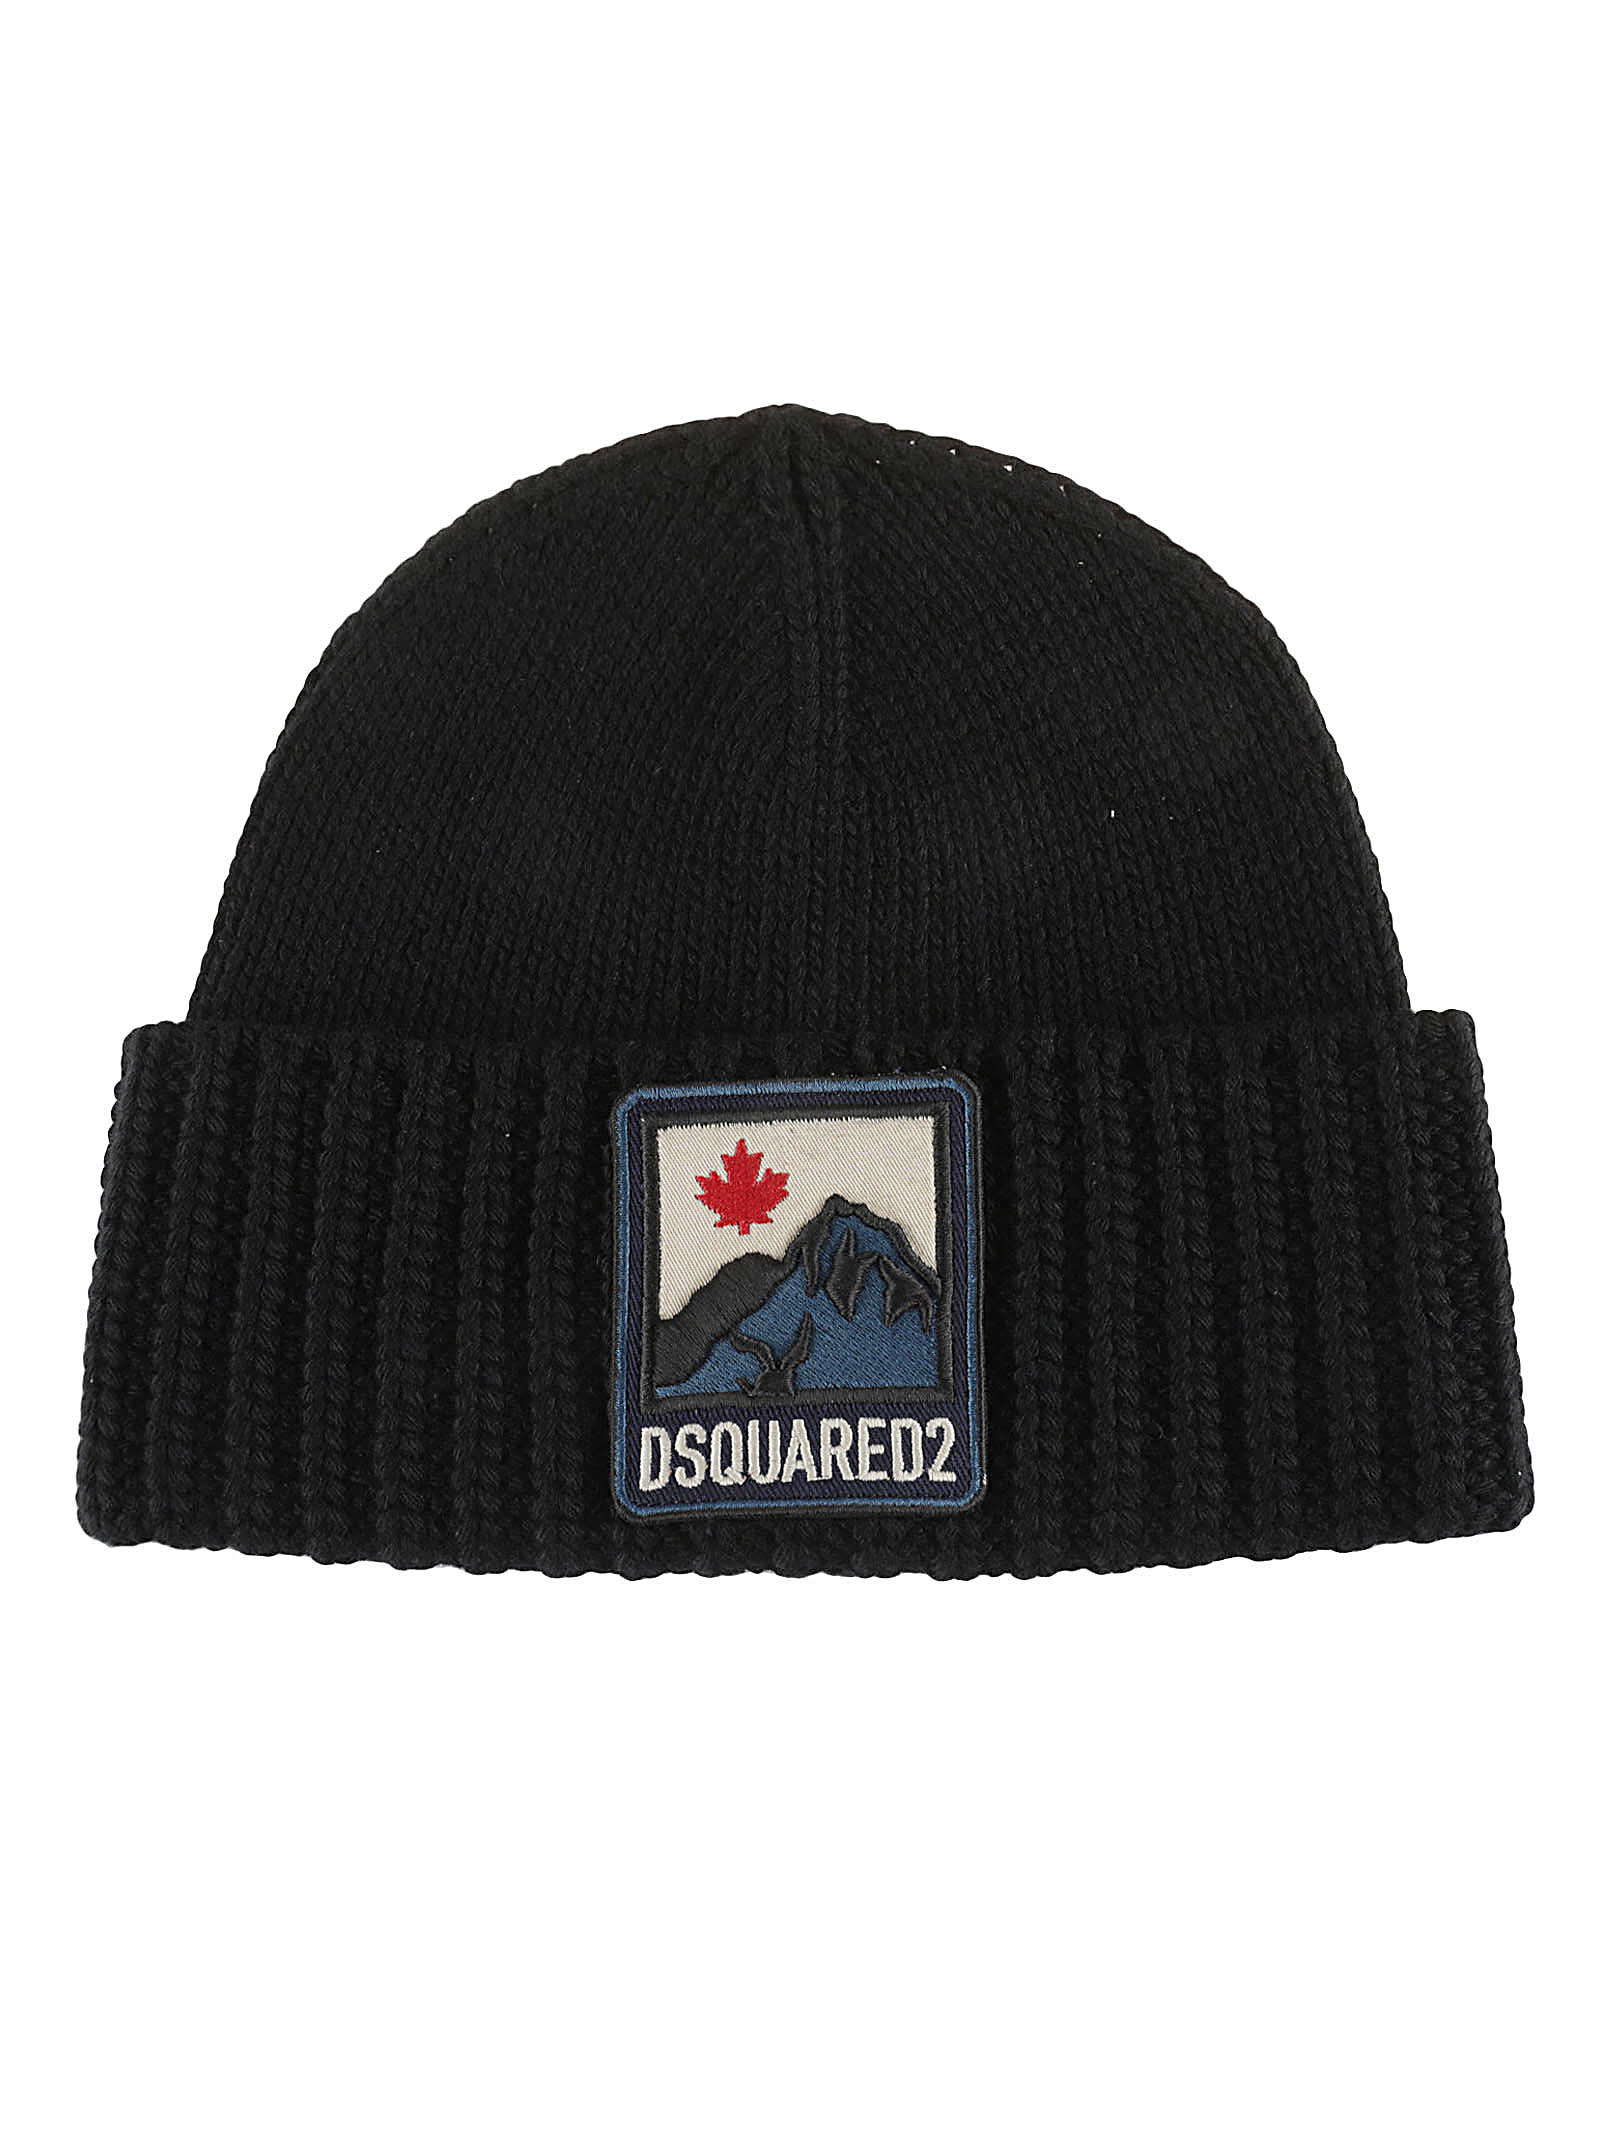 Dsquared2 Simple Knit Beanie